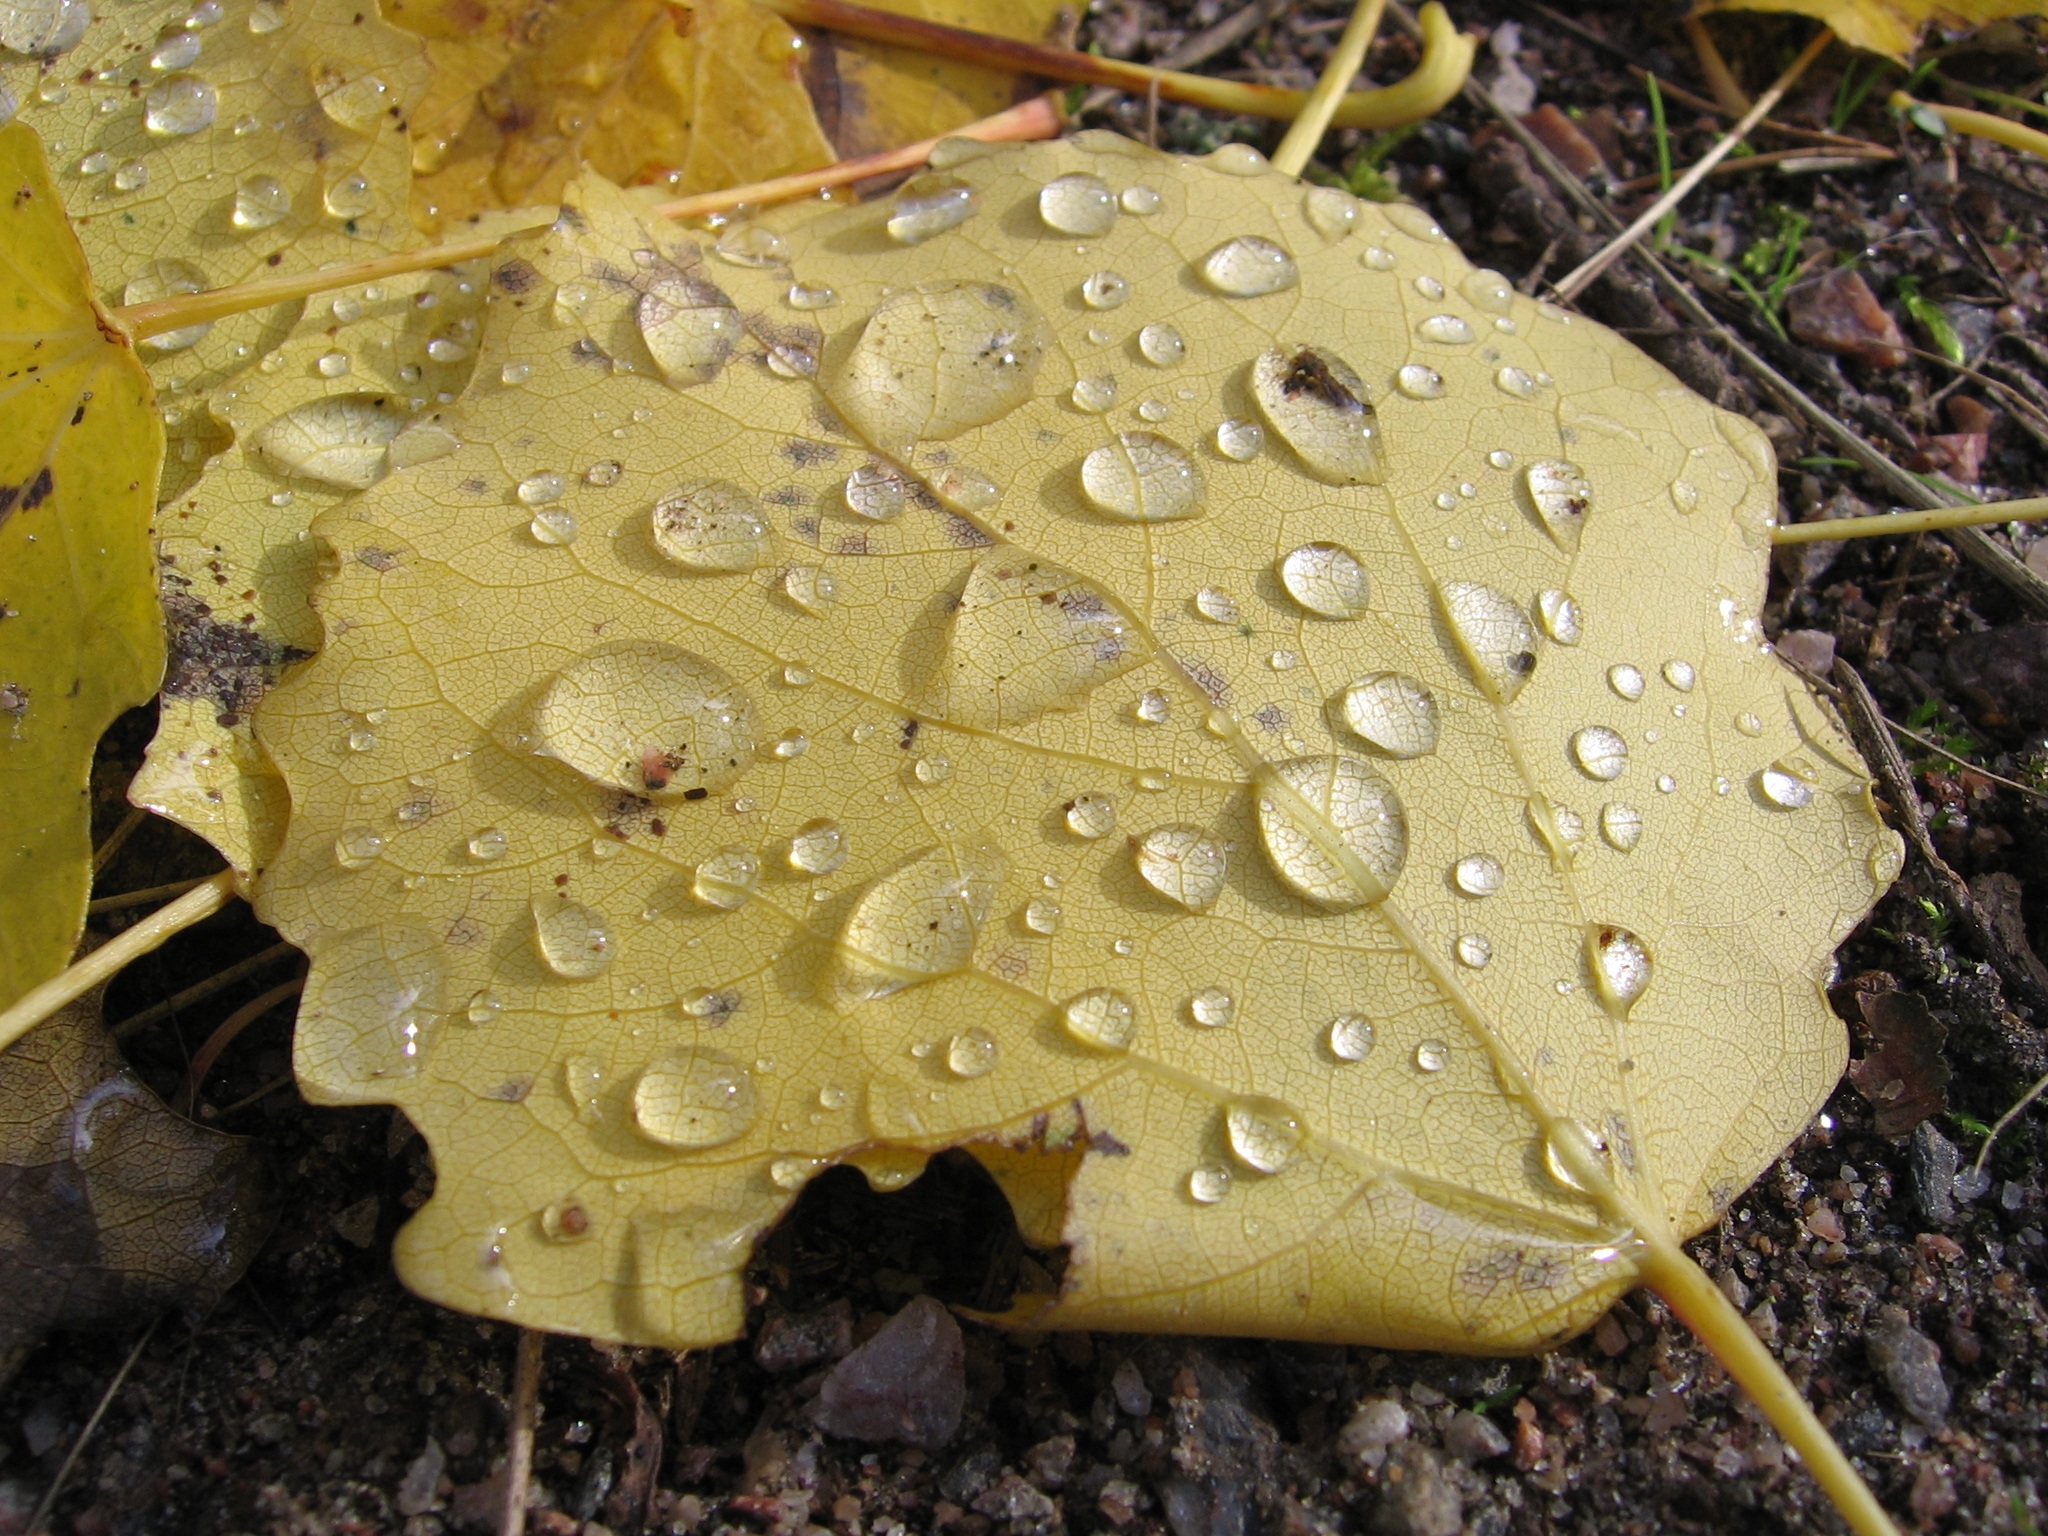 Raindrops on the leave photo